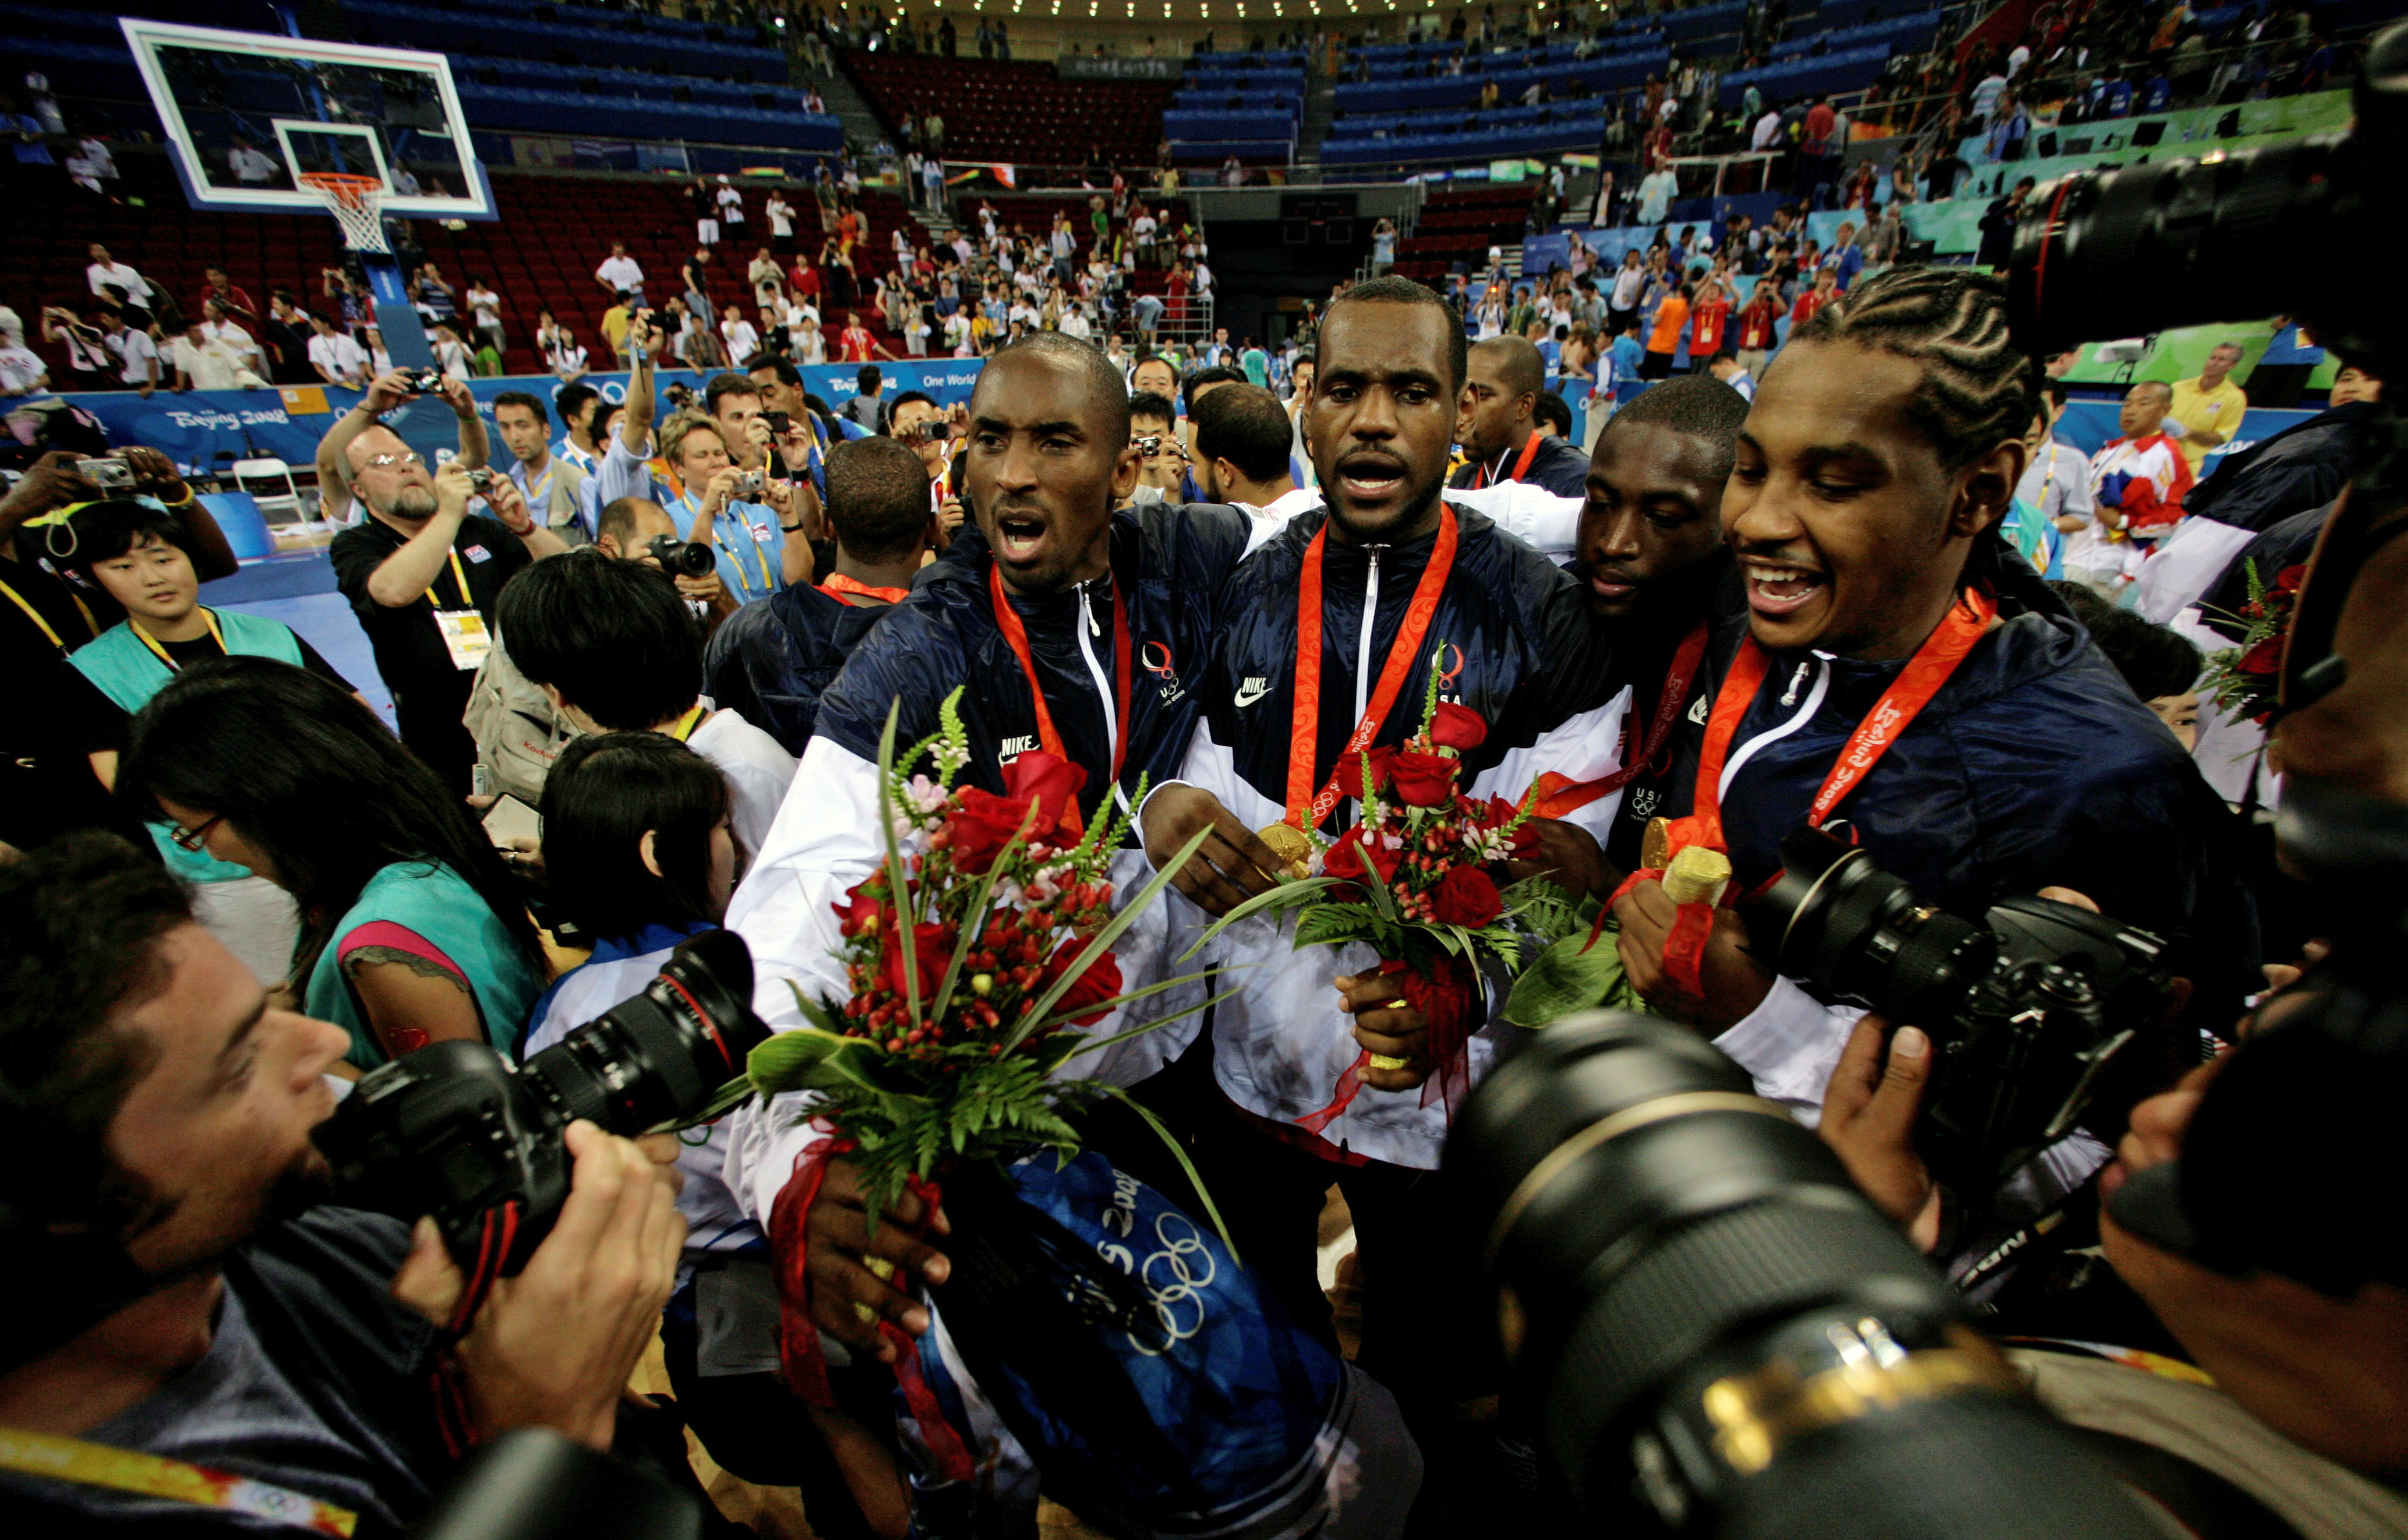 LeBron spent Friday remembering Kobe Bryant and 2008 Gold Medal Game